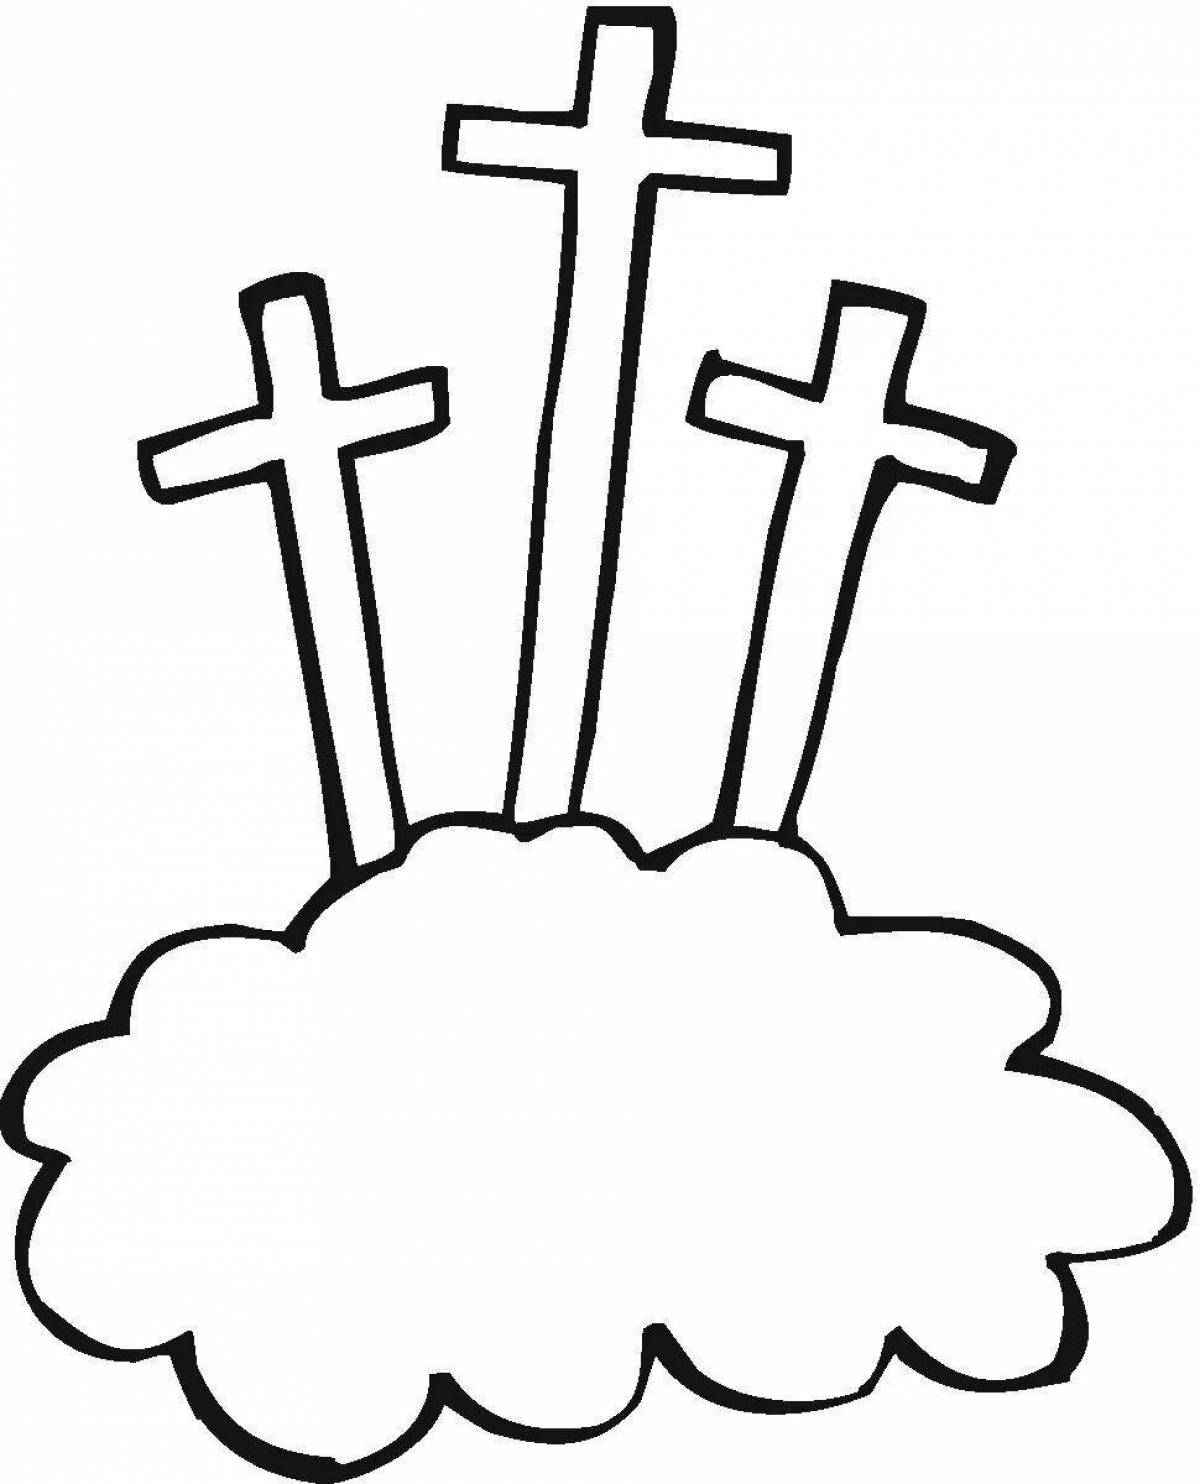 Shining cross coloring pages for kids